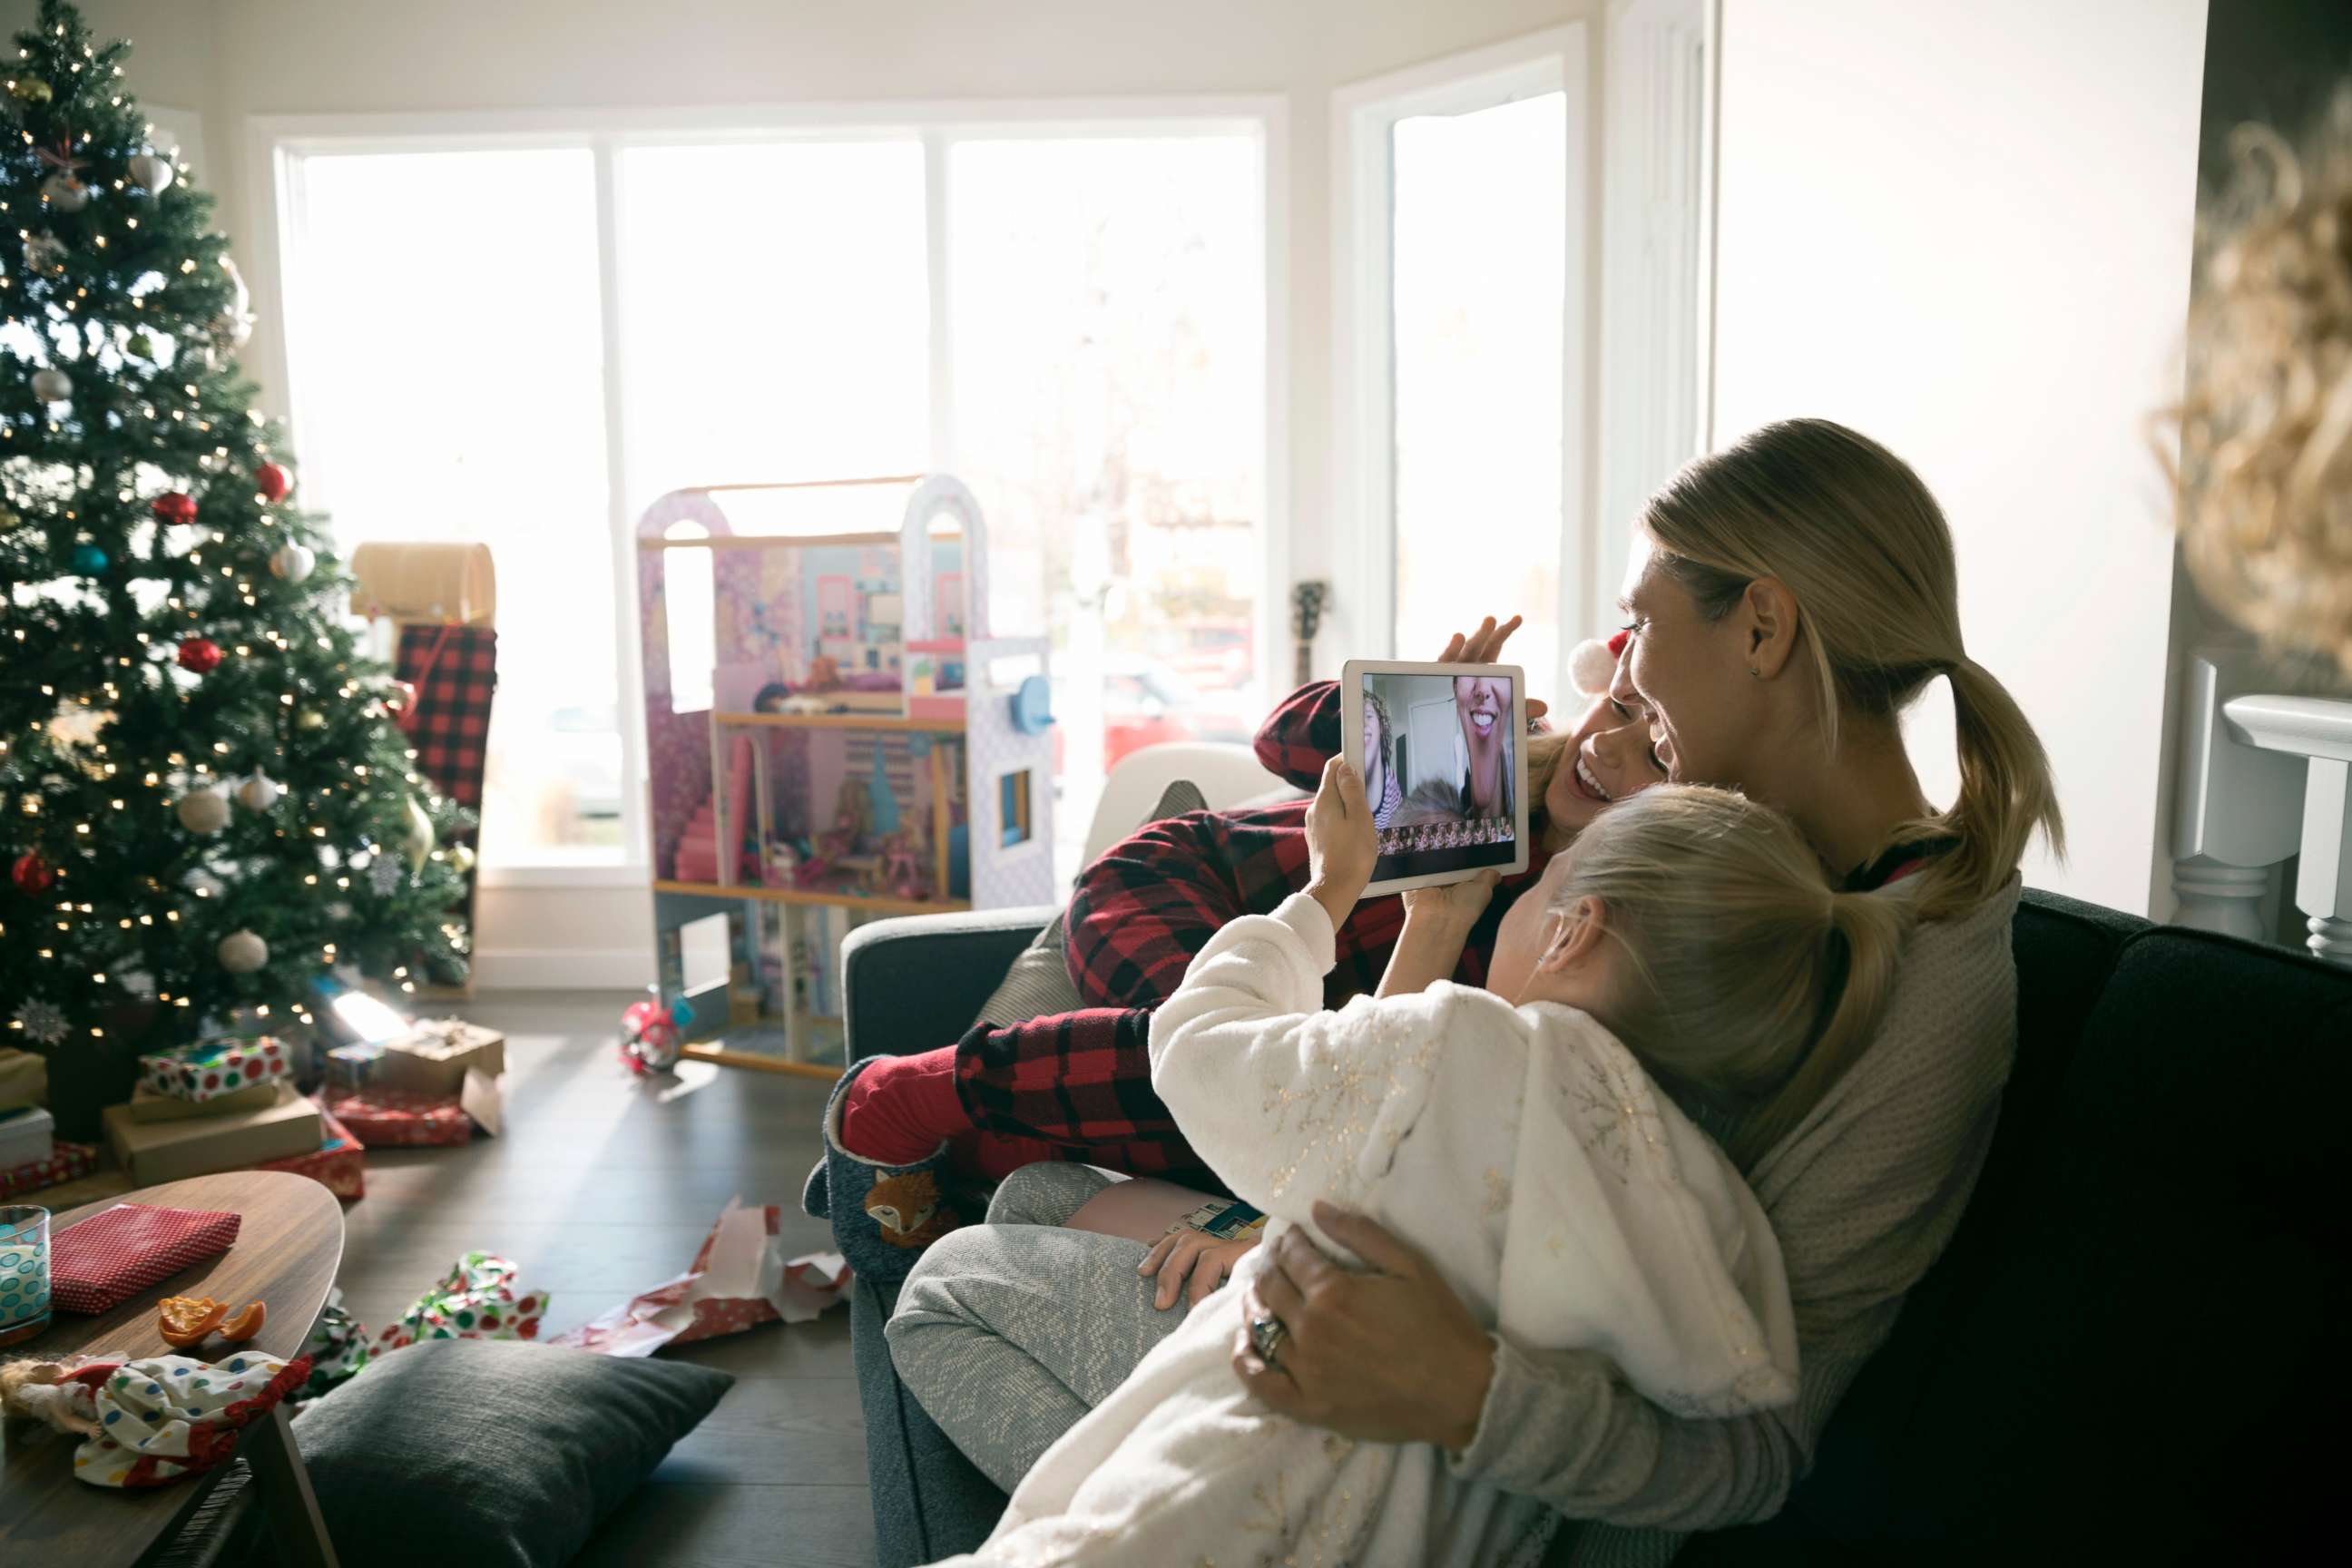 PHOTO: This stock photo depicts a mom with her children on Christmas morning.